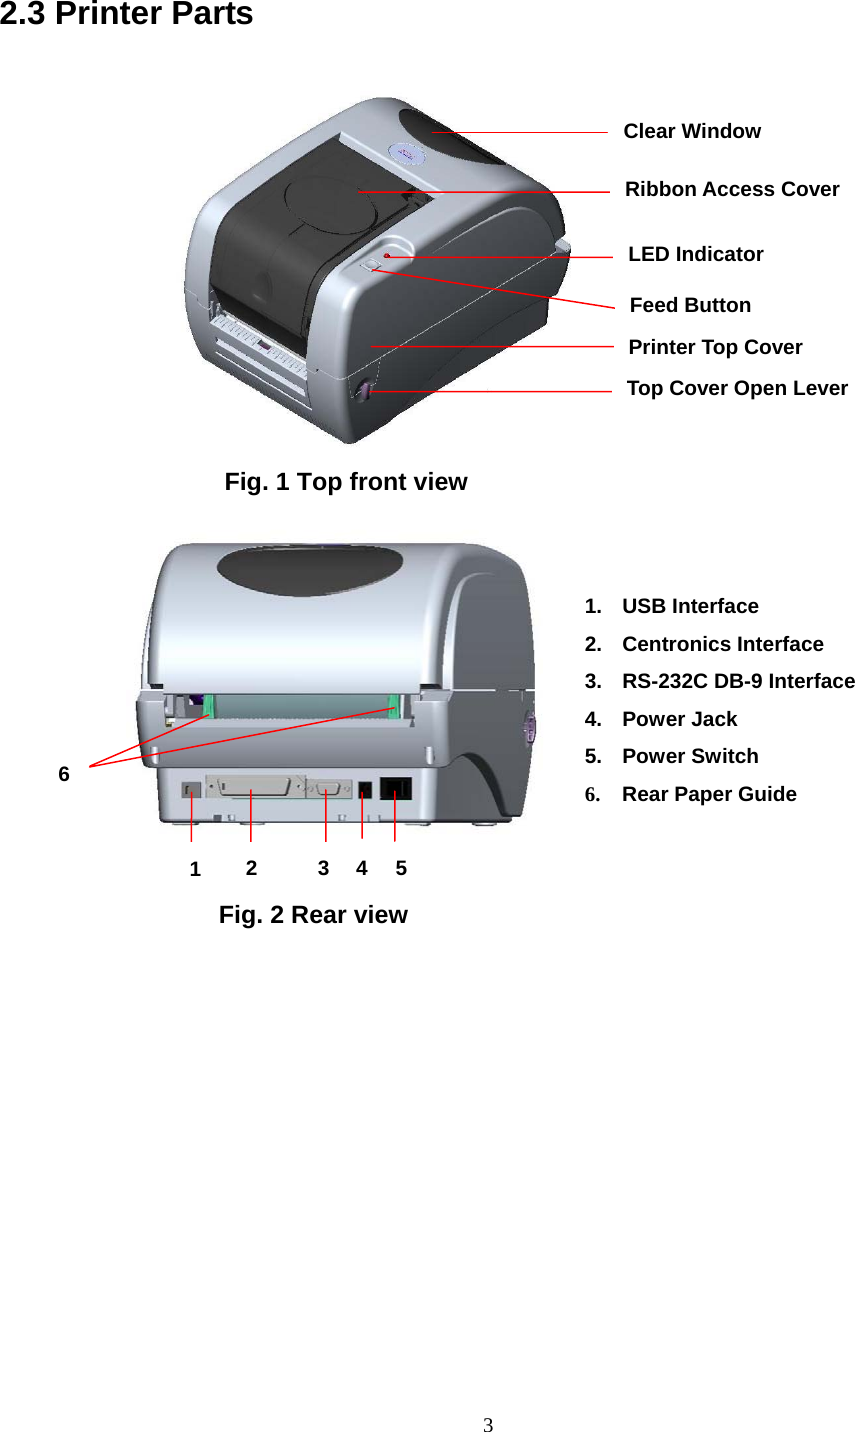  3 2.3 Printer Parts            Fig. 1 Top front view            Top Cover Open Lever LED Indicator Feed Button Printer Top Cover Ribbon Access Cover Clear Window 1  2  3  4  56 1. USB Interface 2. Centronics Interface  3.  RS-232C DB-9 Interface   4. Power Jack 5. Power Switch  6.  Rear Paper Guide Fig. 2 Rear view 